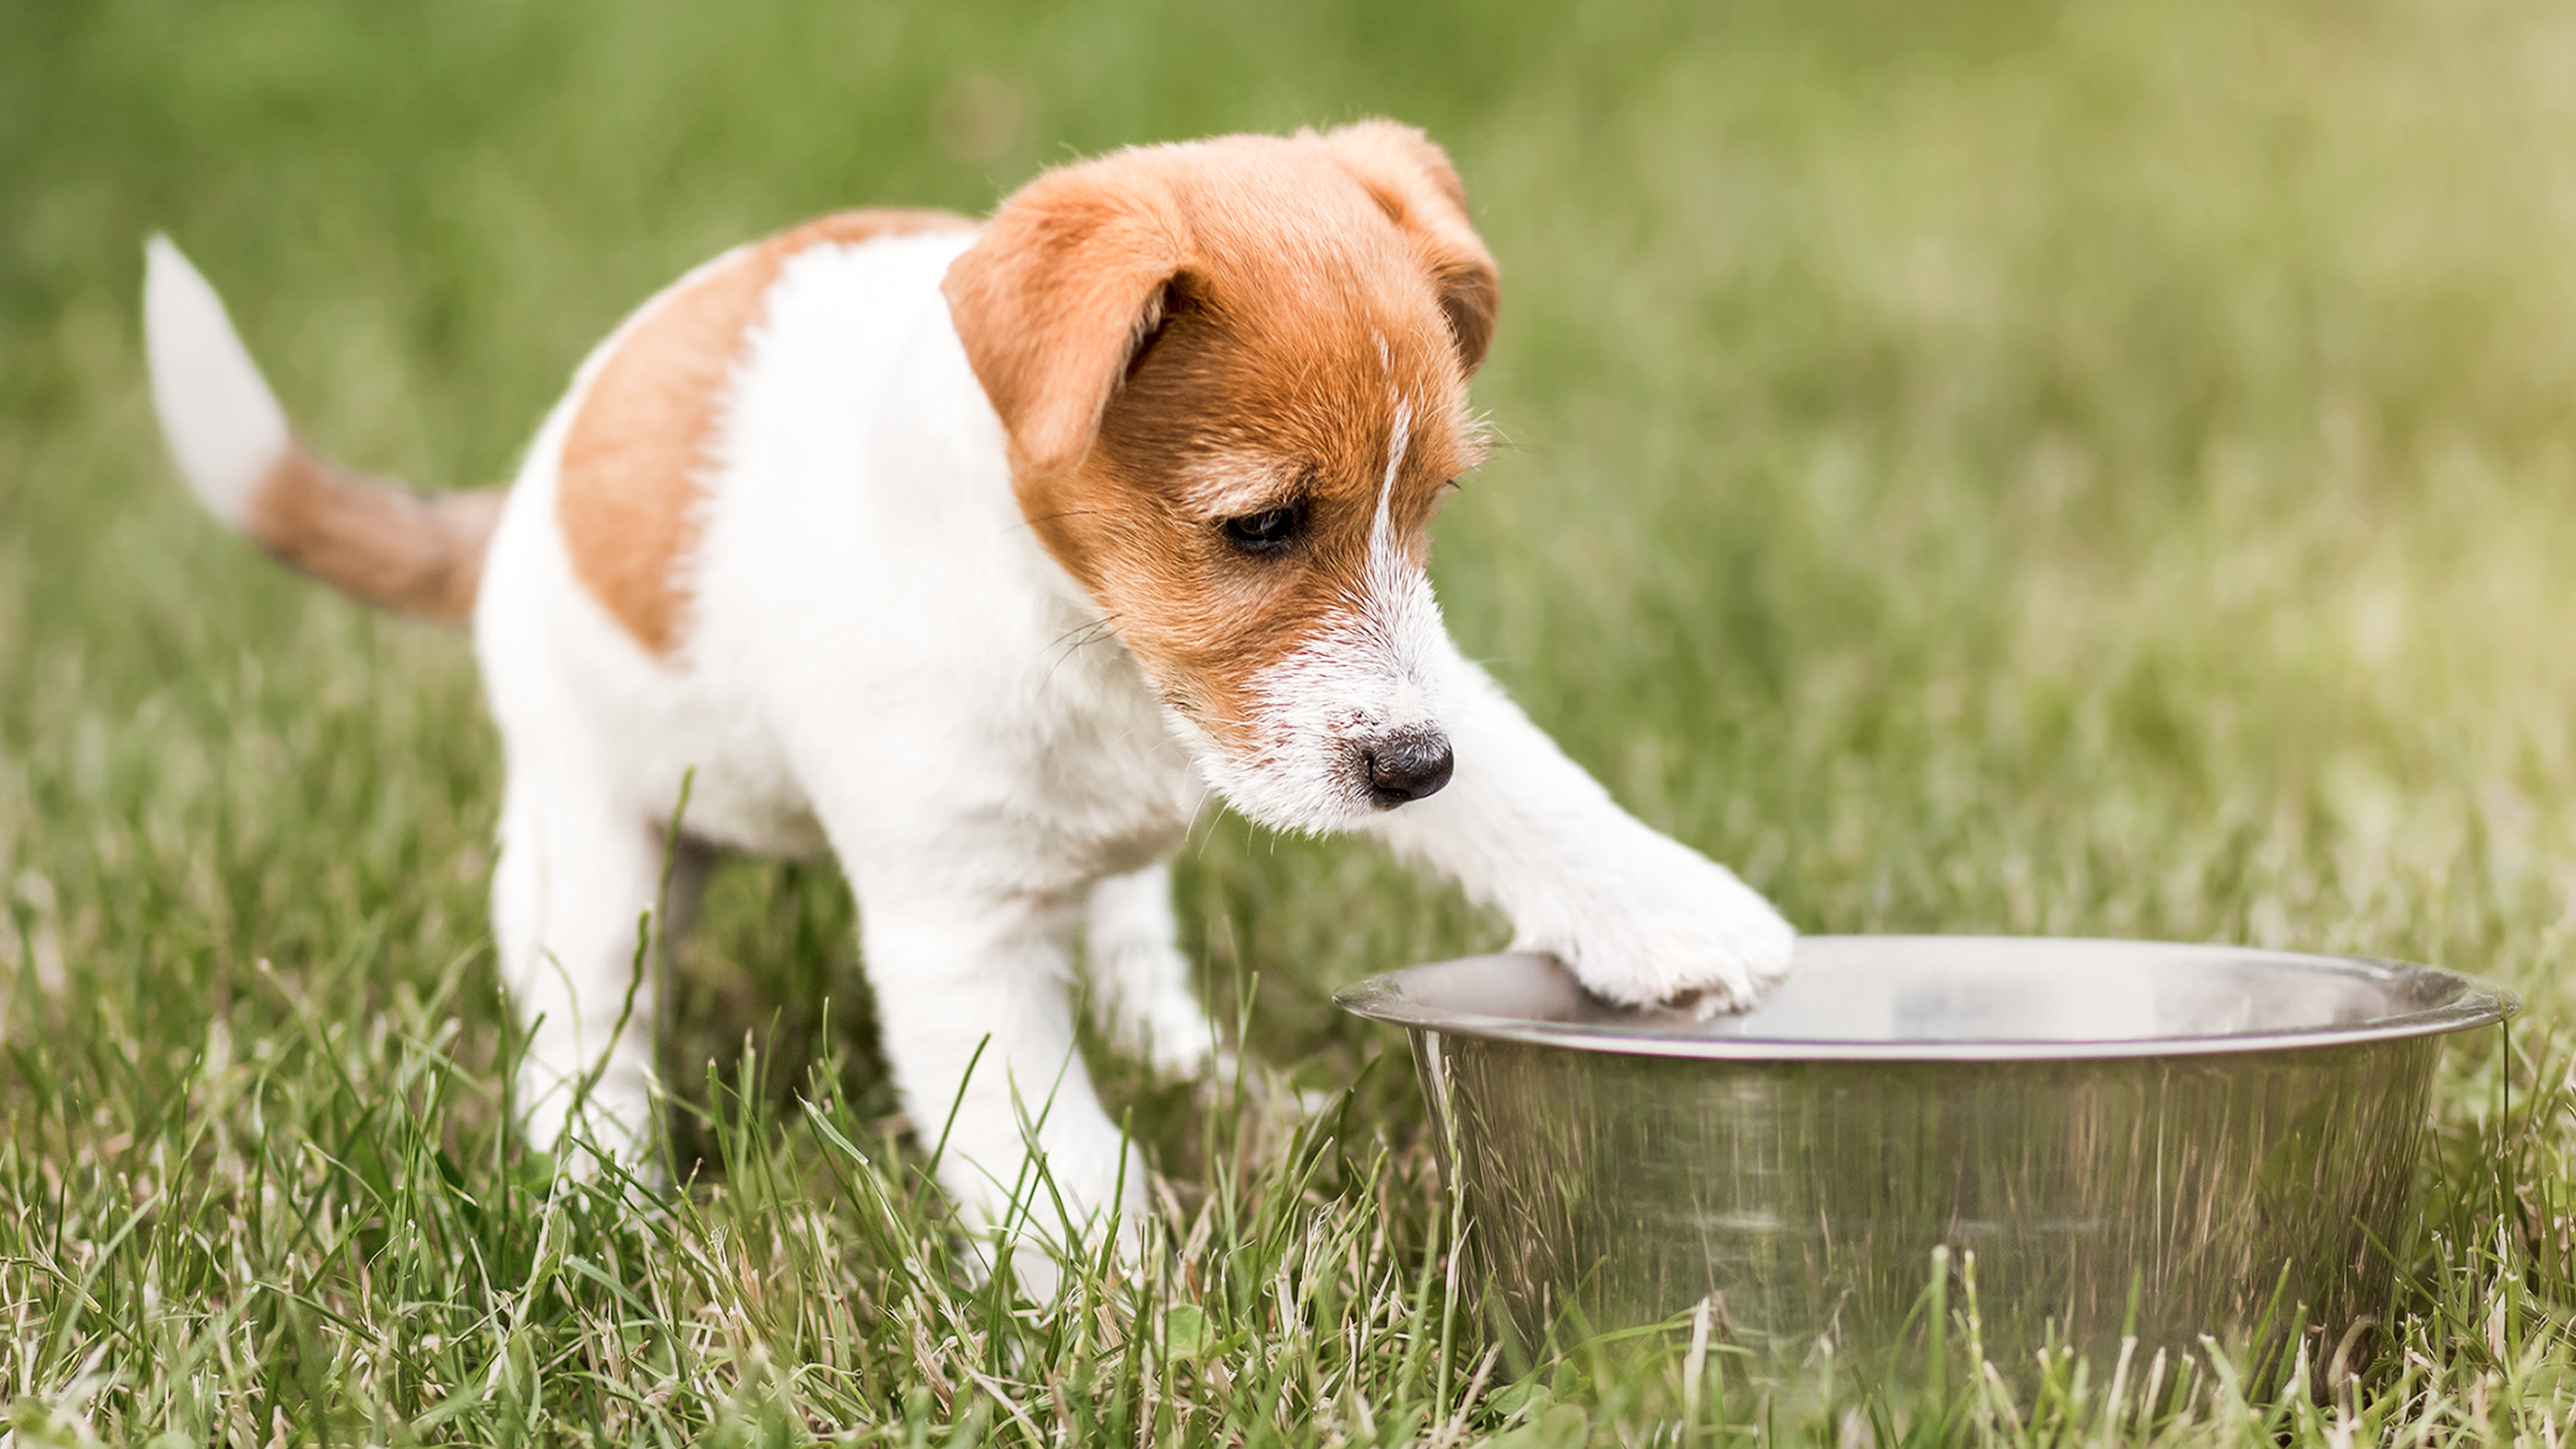 Jack Russell Terrier puppy standing outdoors in grass next to a stainless steel feeding bowl